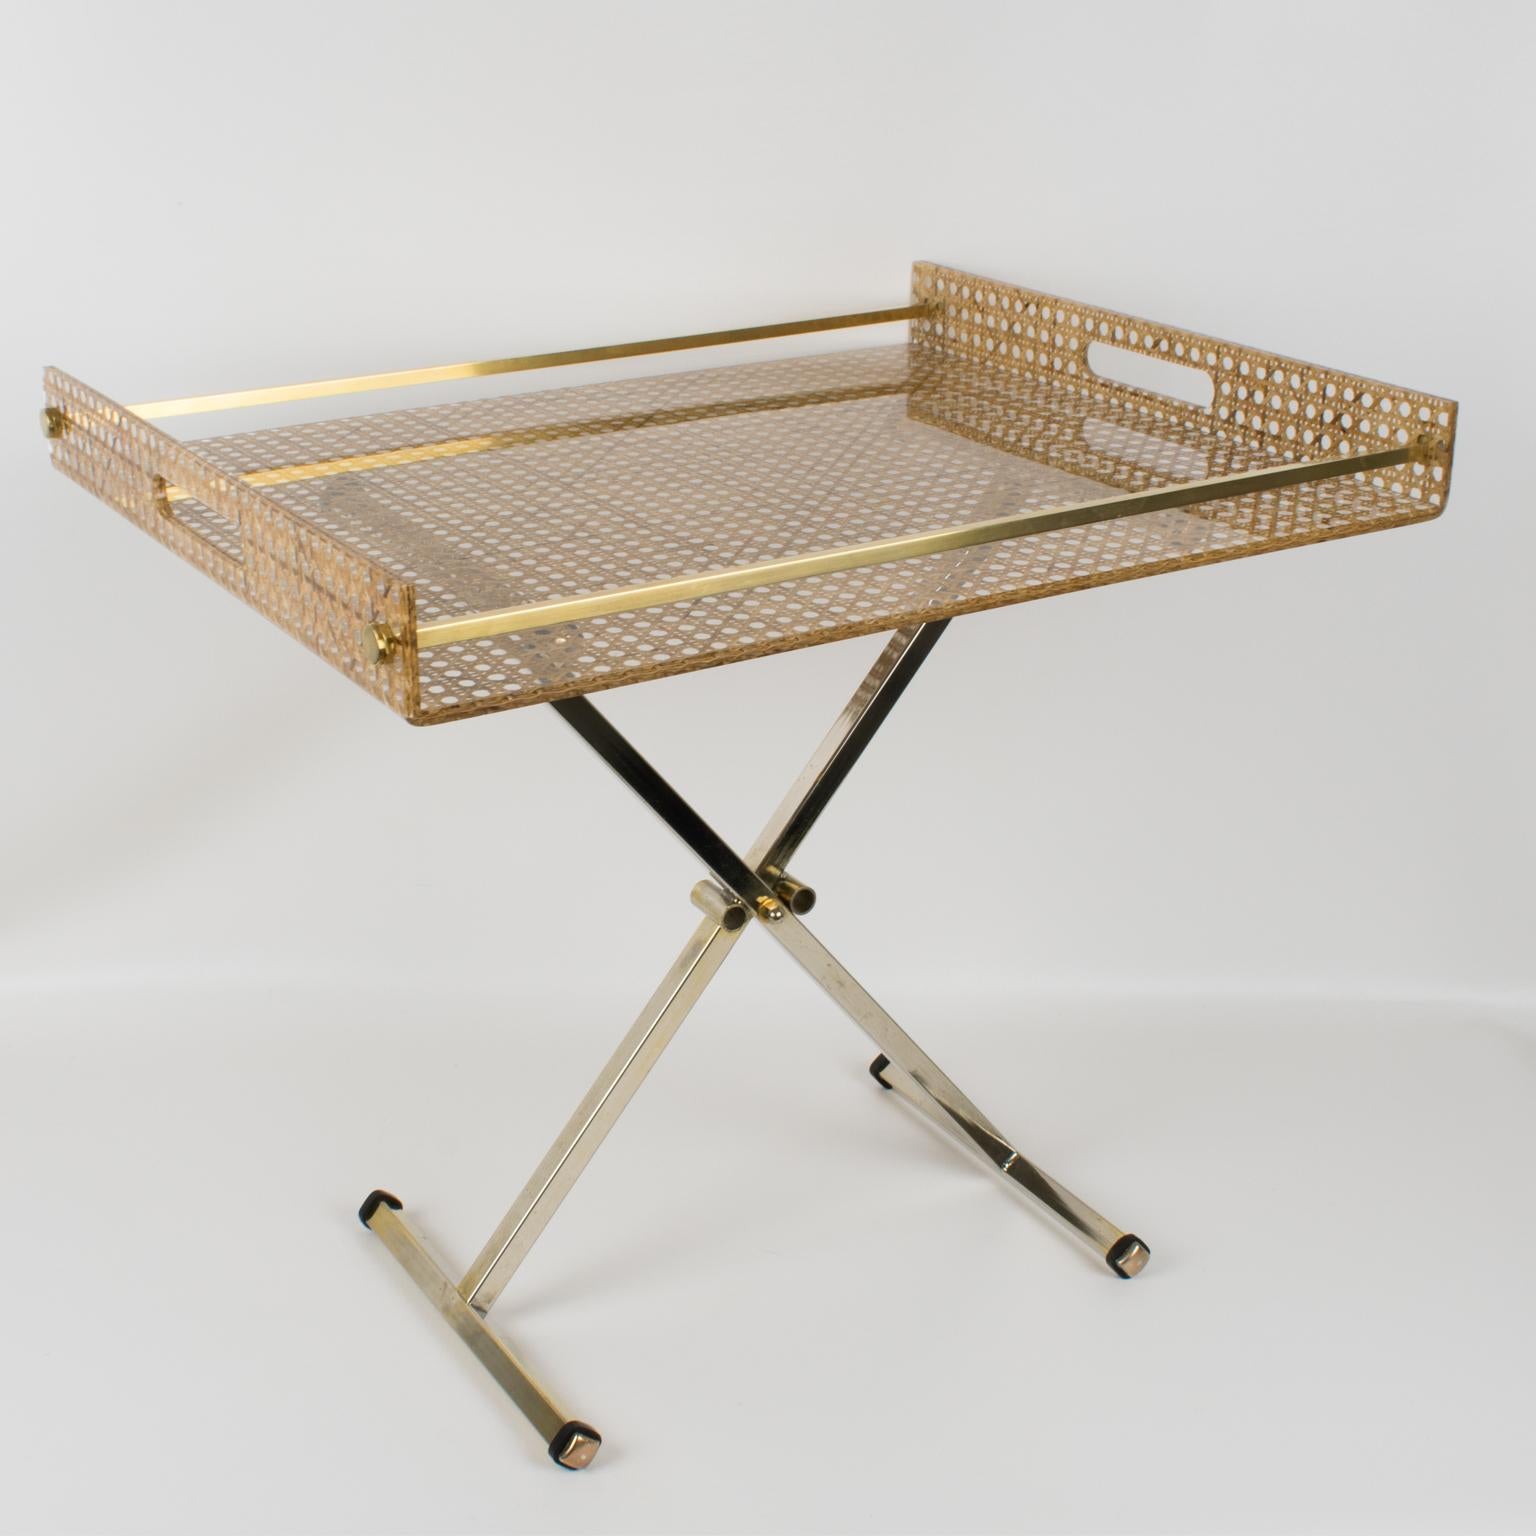 Elegant large barware folding tray table designed for Christian Dior Home Collection, in the 1970s. Rectangular butler shape with gilt brass gallery and real rattan cane-work or wicker embedded in the crystal clear Lucite. Gilded anodized metal